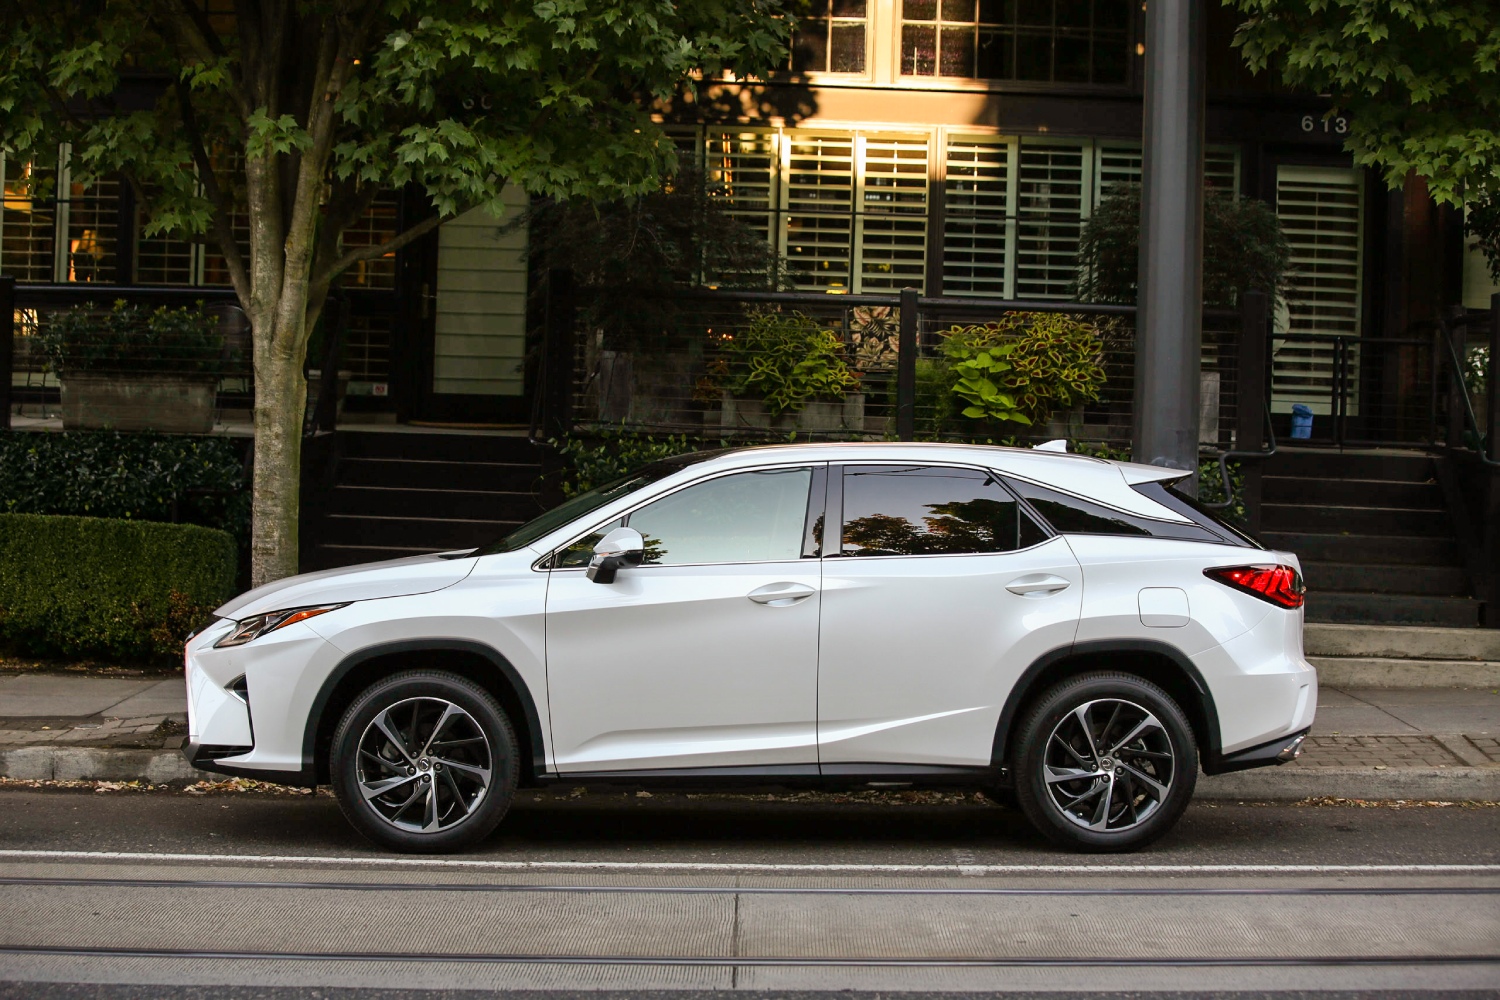 The best used luxury midsize SUVs over $40,000 include the Lexus RX